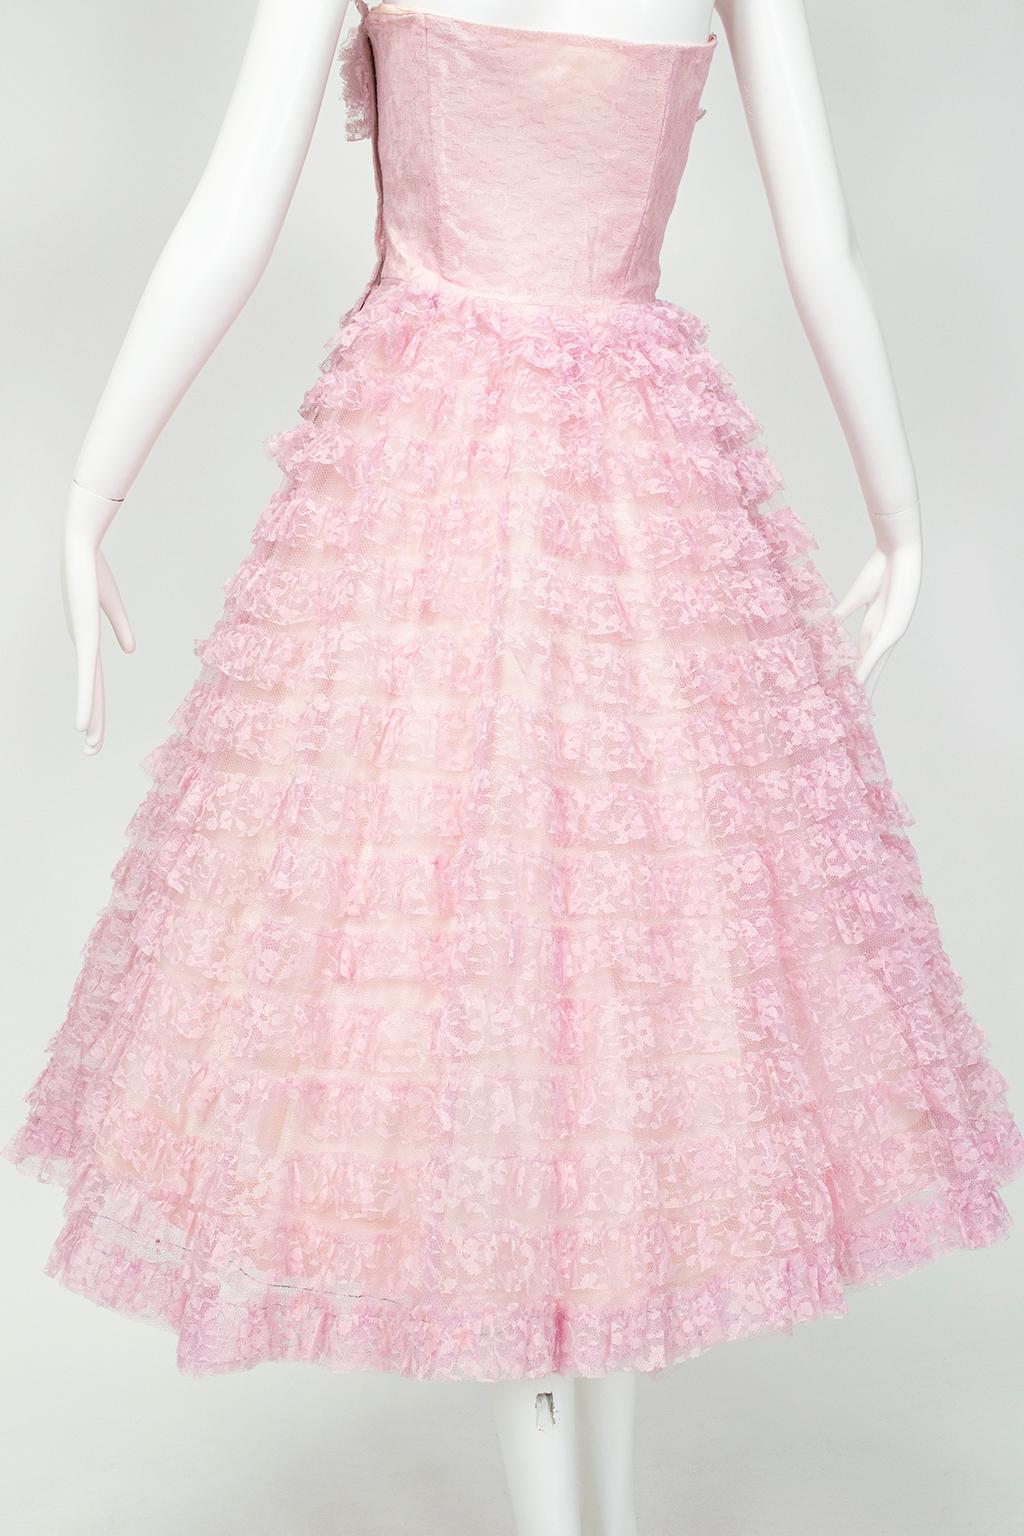 Pink-Lavender New Look Strapless Tiered Lace Ballerina Party Dress – S-M, 1950s In Good Condition For Sale In Tucson, AZ